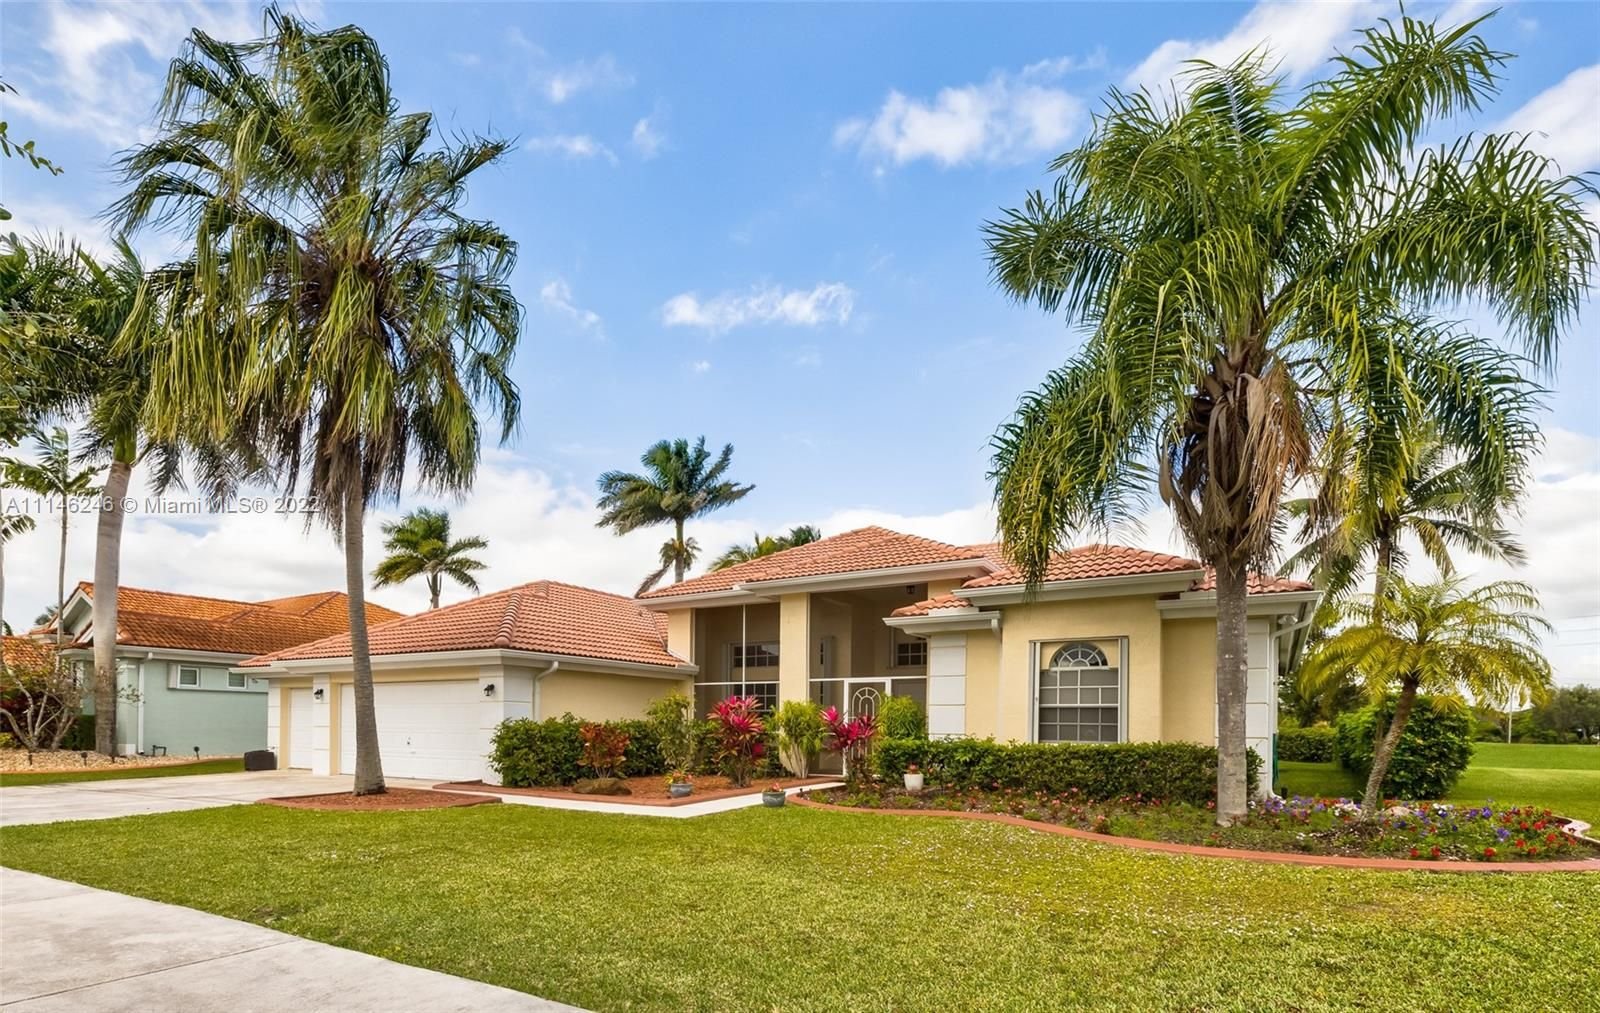 Real estate property located at 2575 Muirfield Ter, Miami-Dade County, Homestead, FL